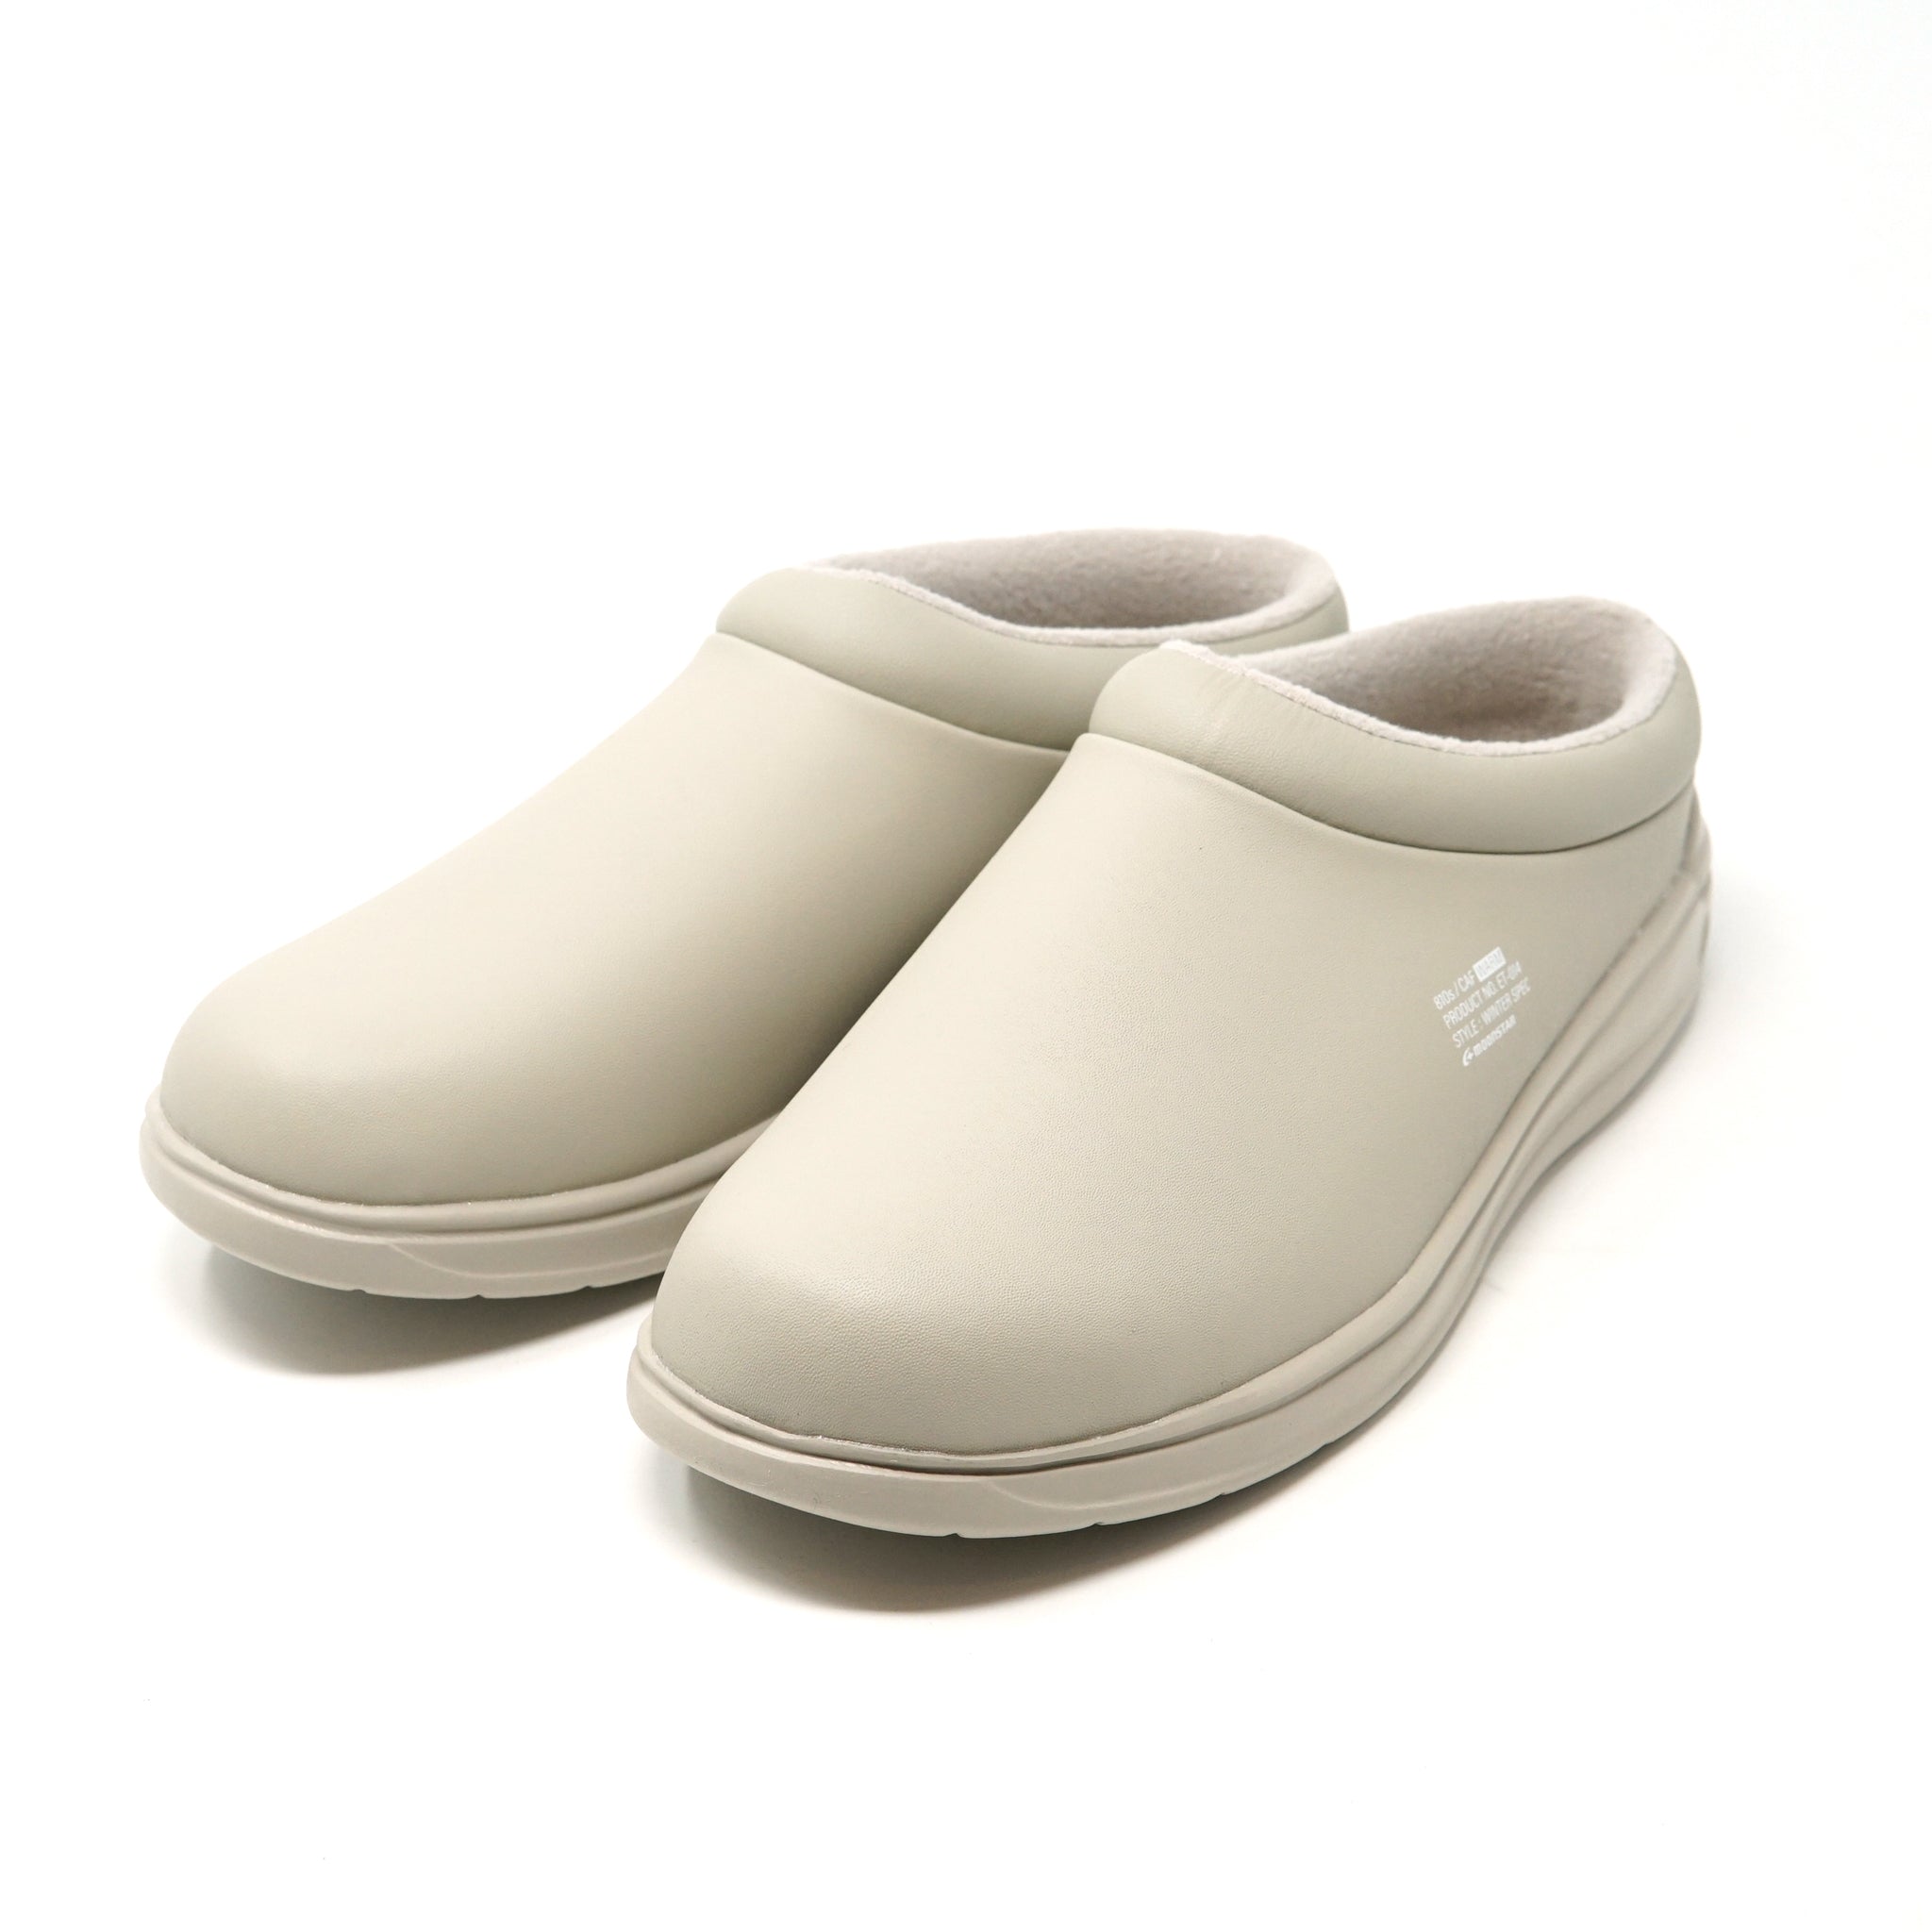 NO:ET014 | Name:CAF WARM カフ ウォーム | Color:Beige【810S_エイトテンス】【MOONSTAR_ムーンスター】